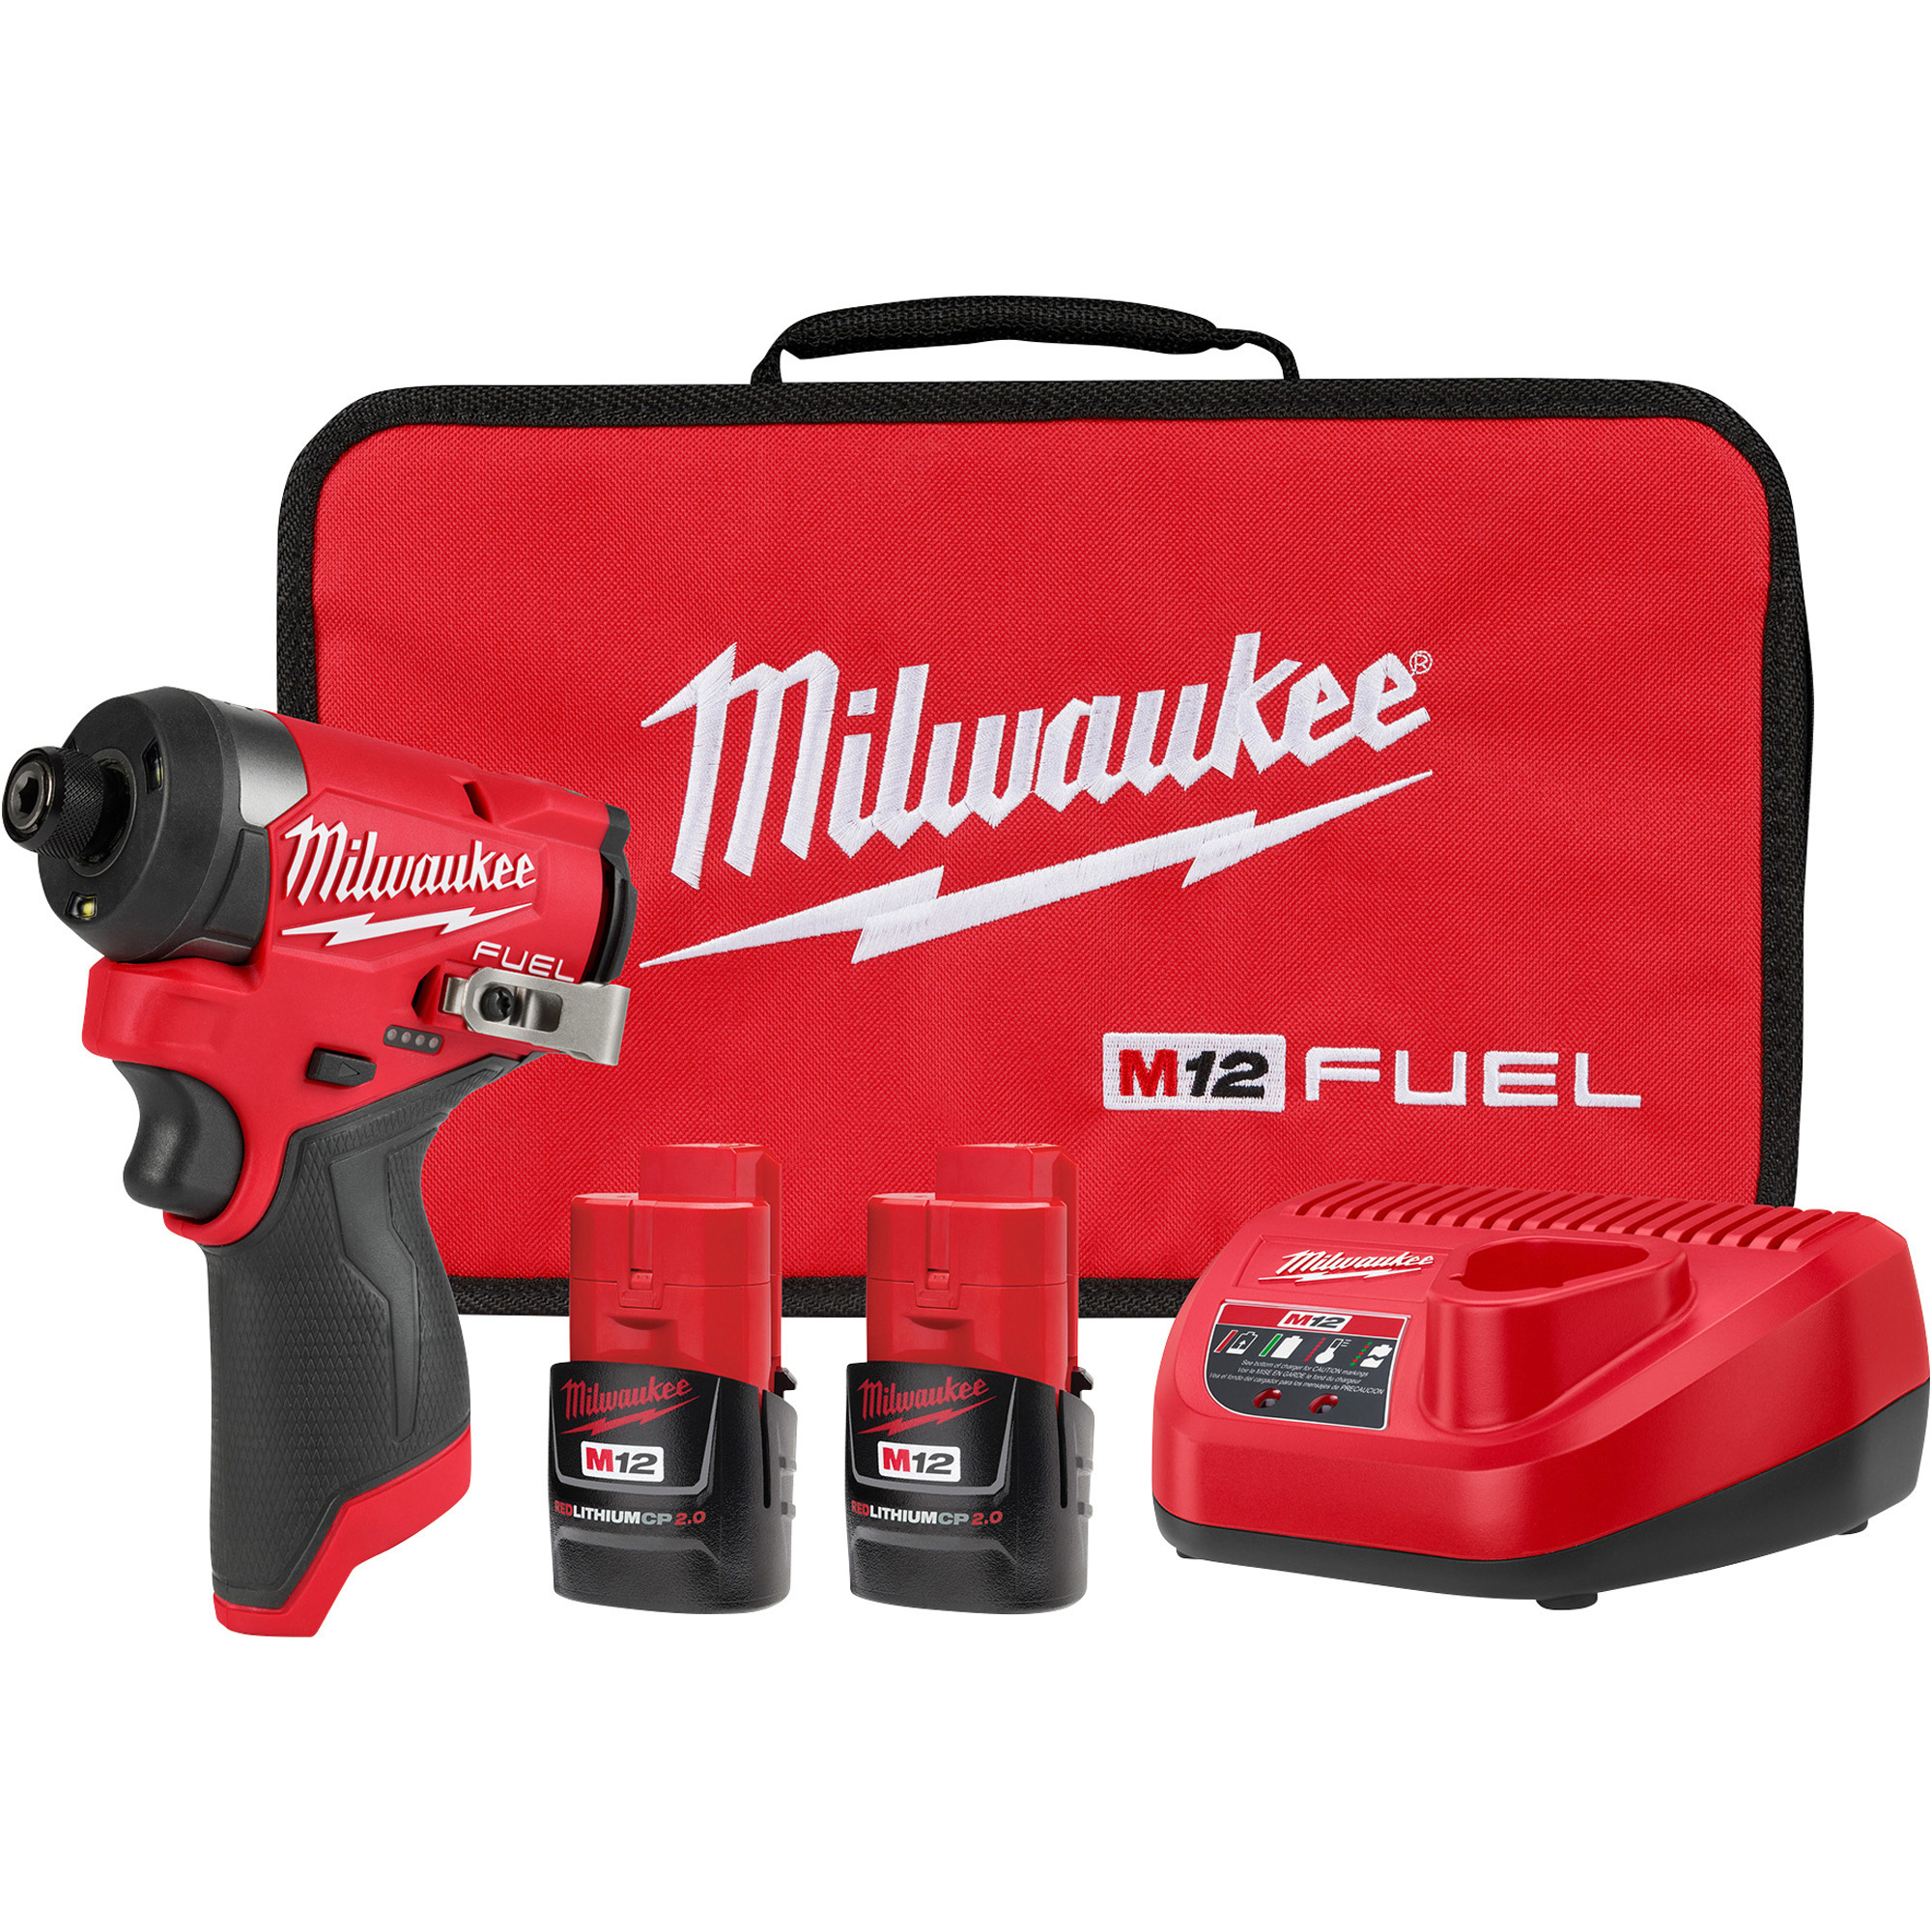 Milwaukee M12 FUEL 1/4Inch Hex Impact Driver Kit, 2 Batteries, Model 3453-22